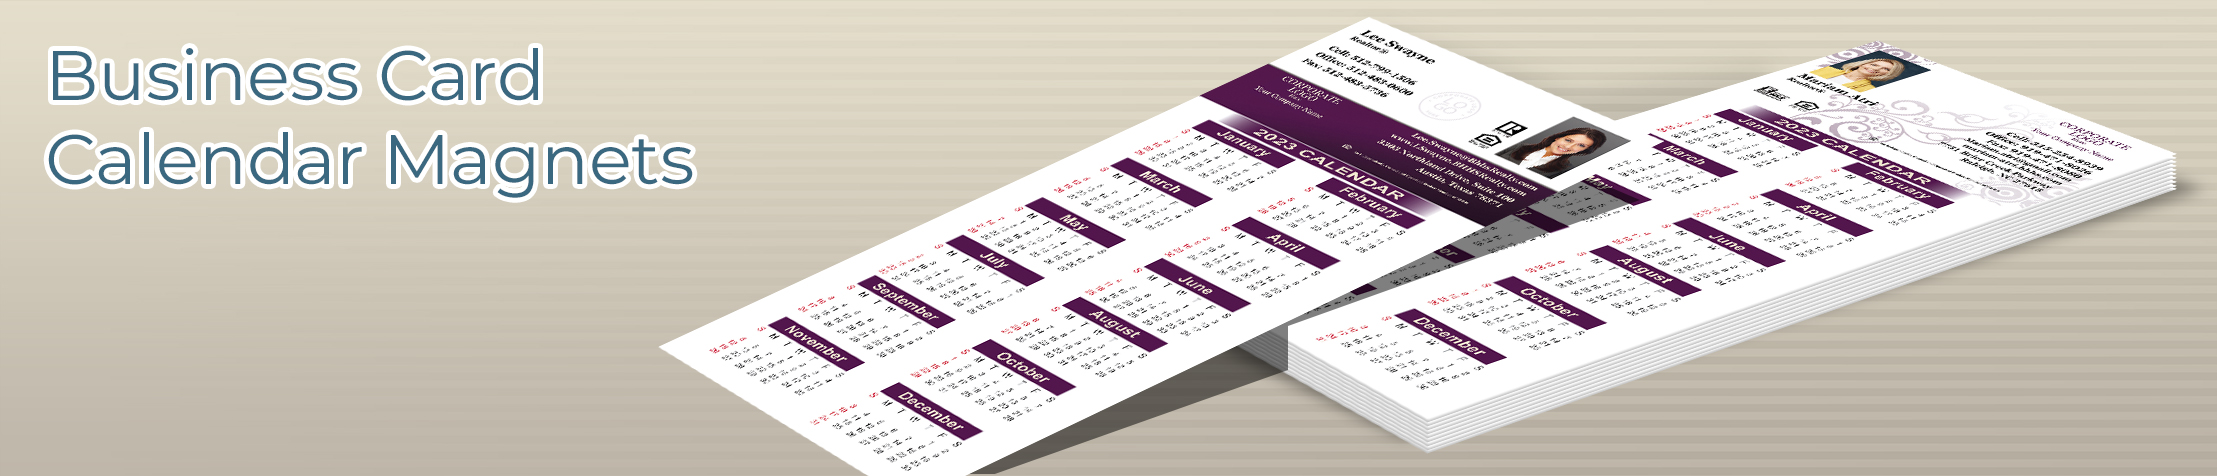 Berkshire Hathaway Real Estate Business Card Calendar Magnets - Berkshire Hathaway  2019 calendars with photo and contact info | BestPrintBuy.com